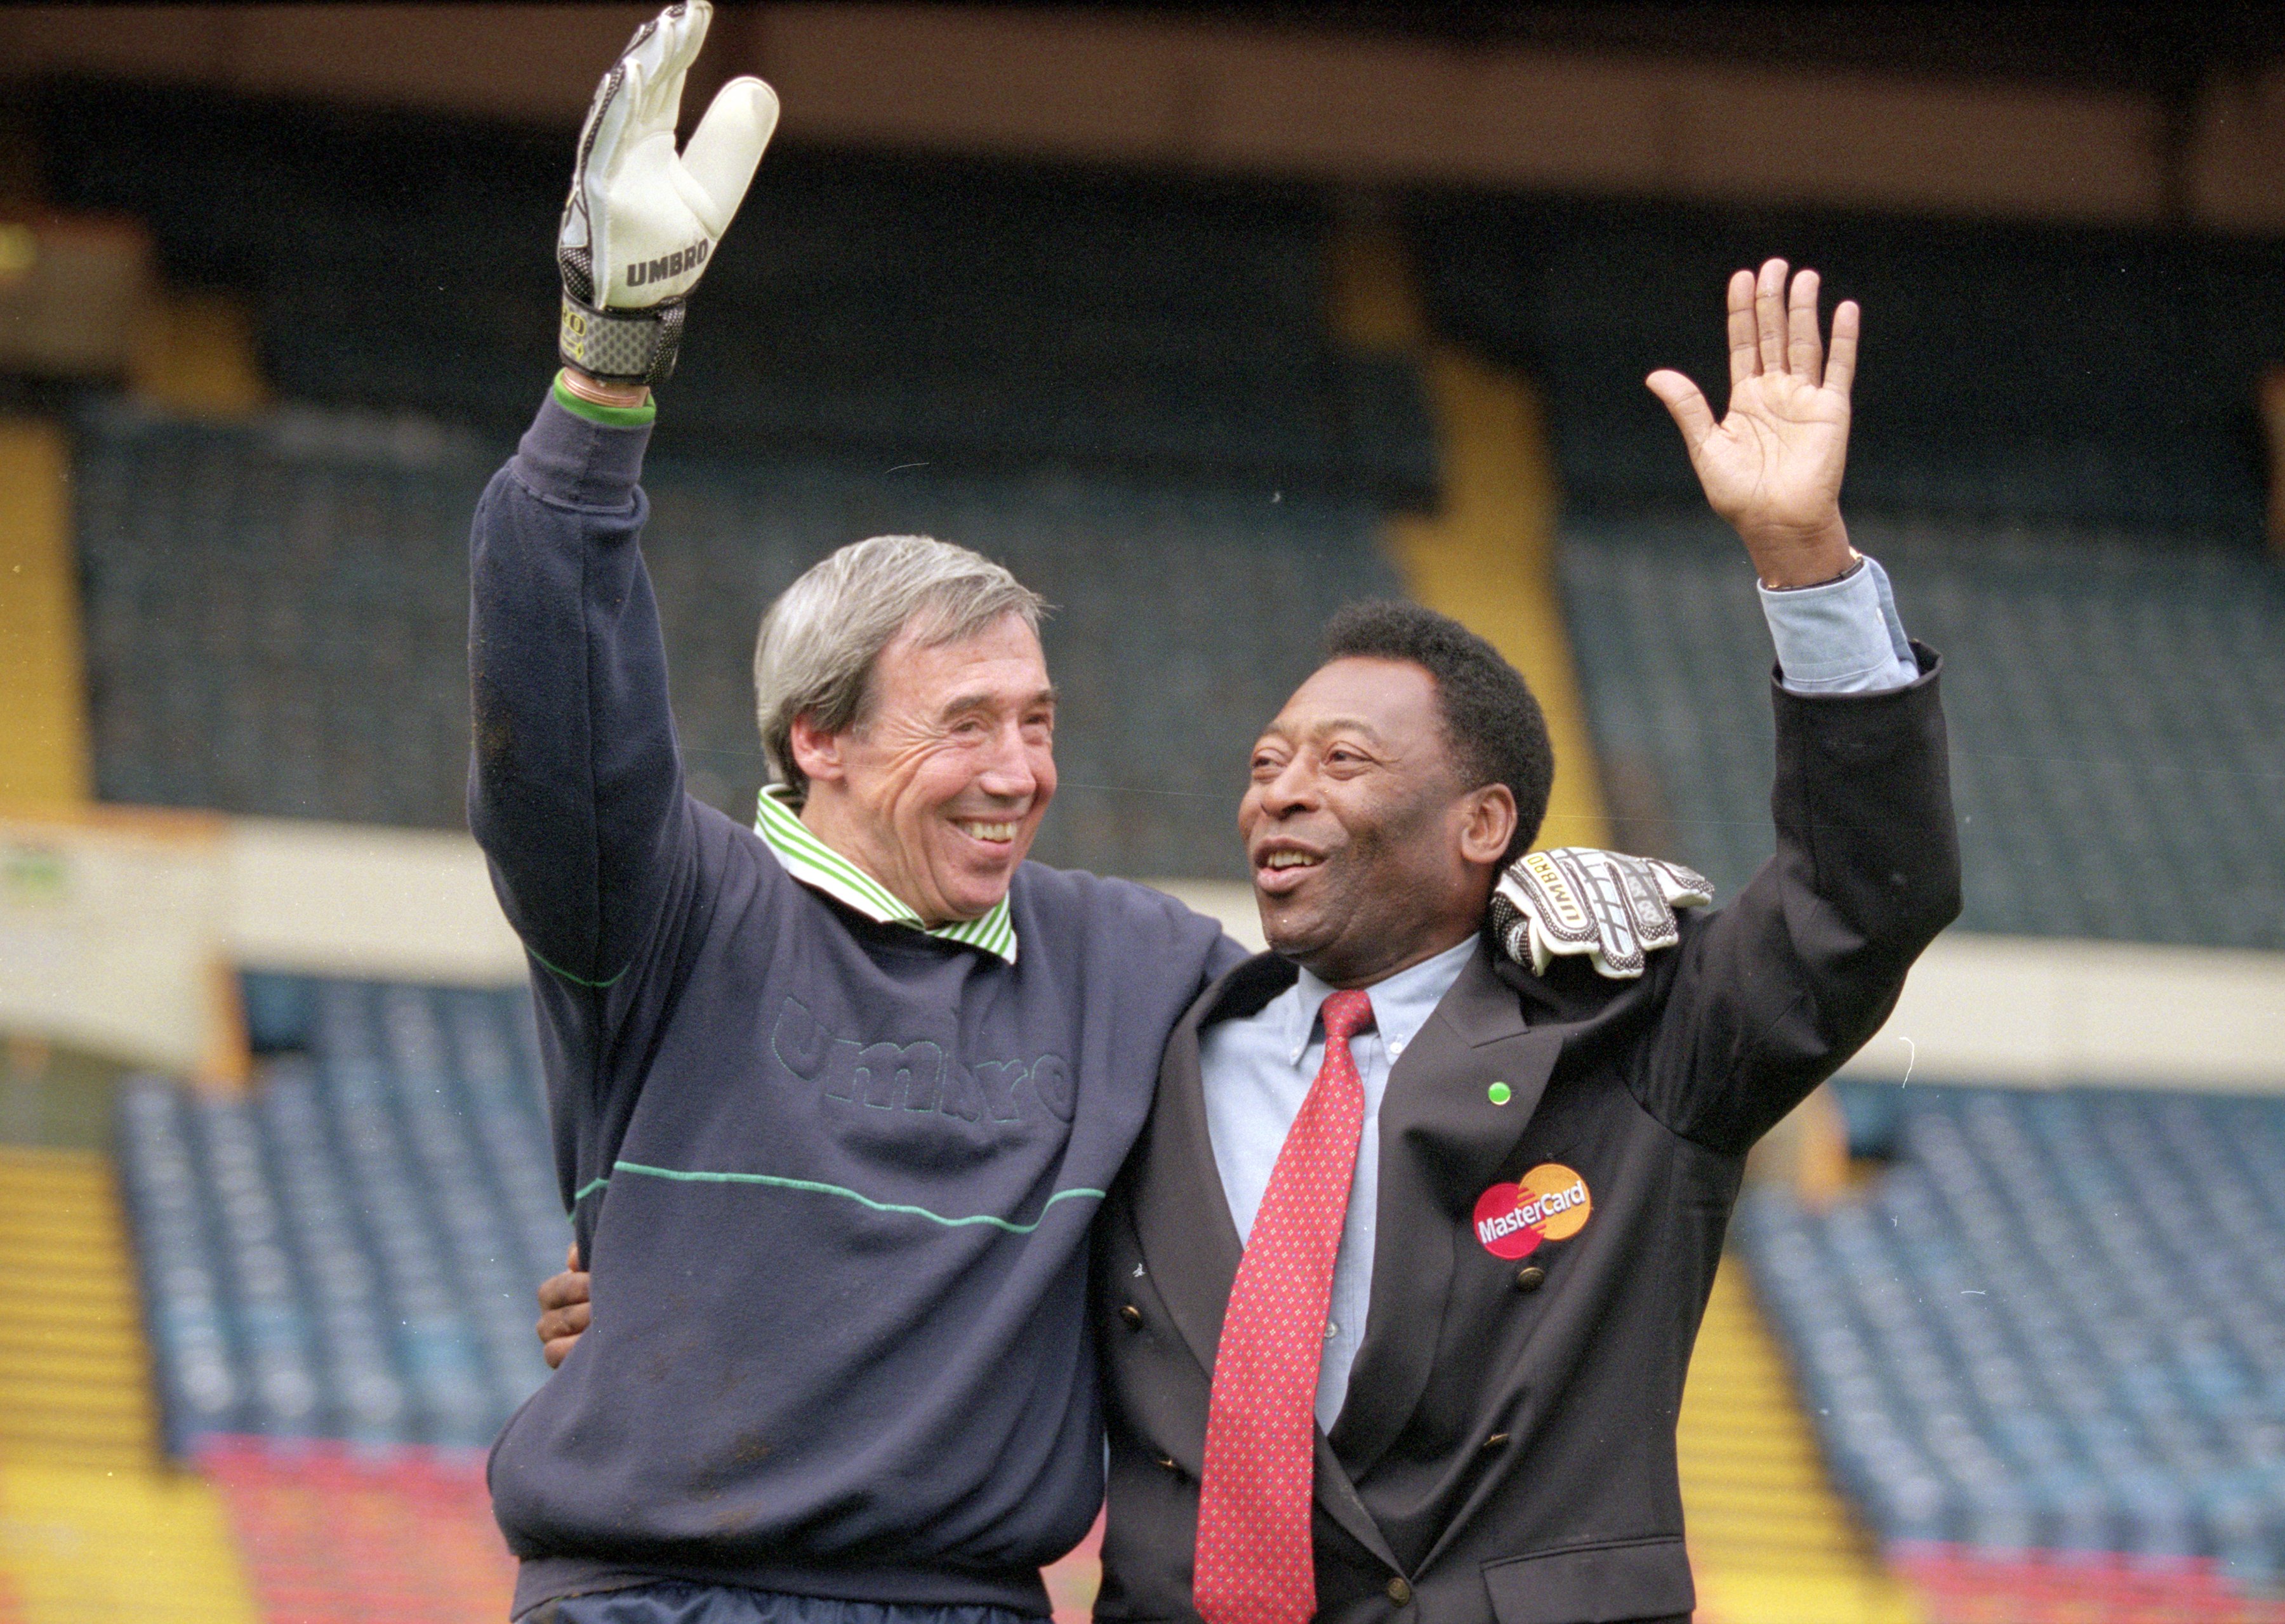 Gordon Banks with Pele, the man he saved so memorably from in the 1970 World Cup